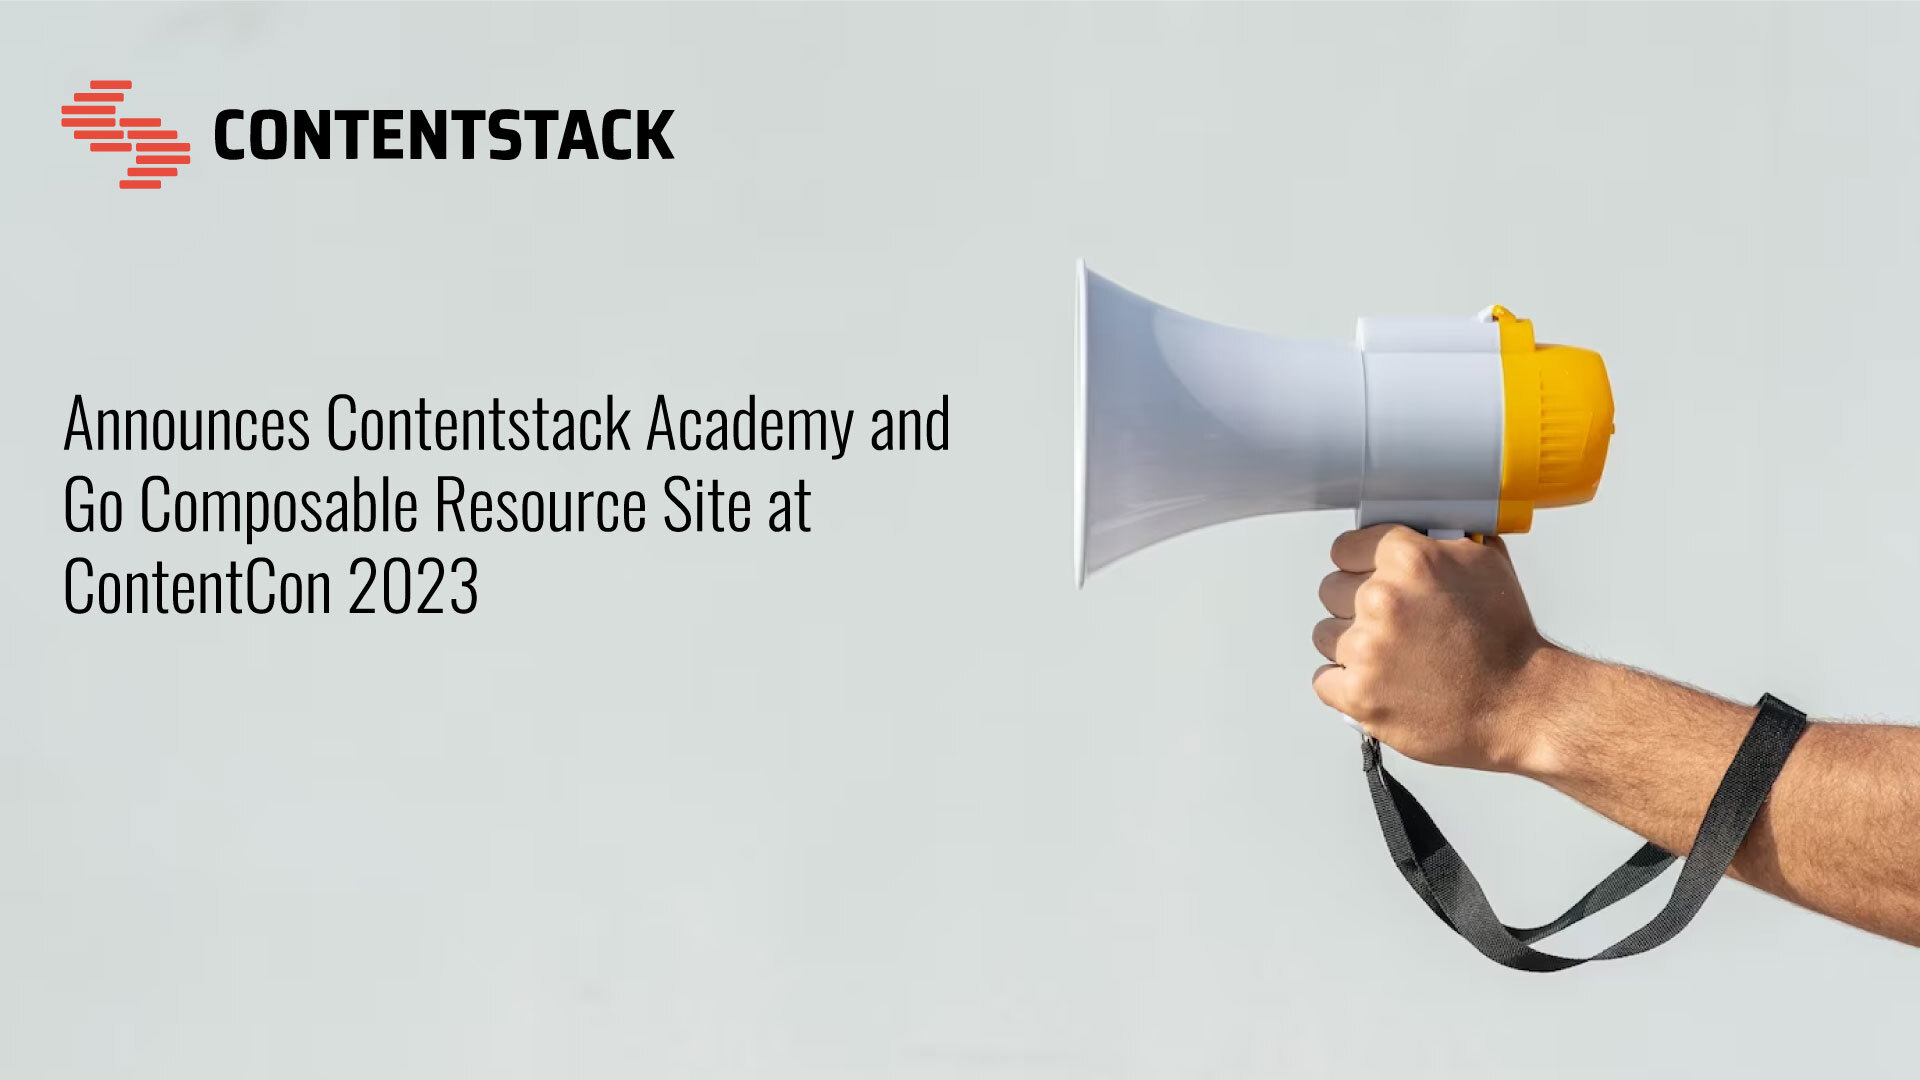 Contentstack Showcases First-Ever Fully Automated Composable Digital Experience Platform, Announces Contentstack Academy and Go Composable Resource Site at ContentCon 2023